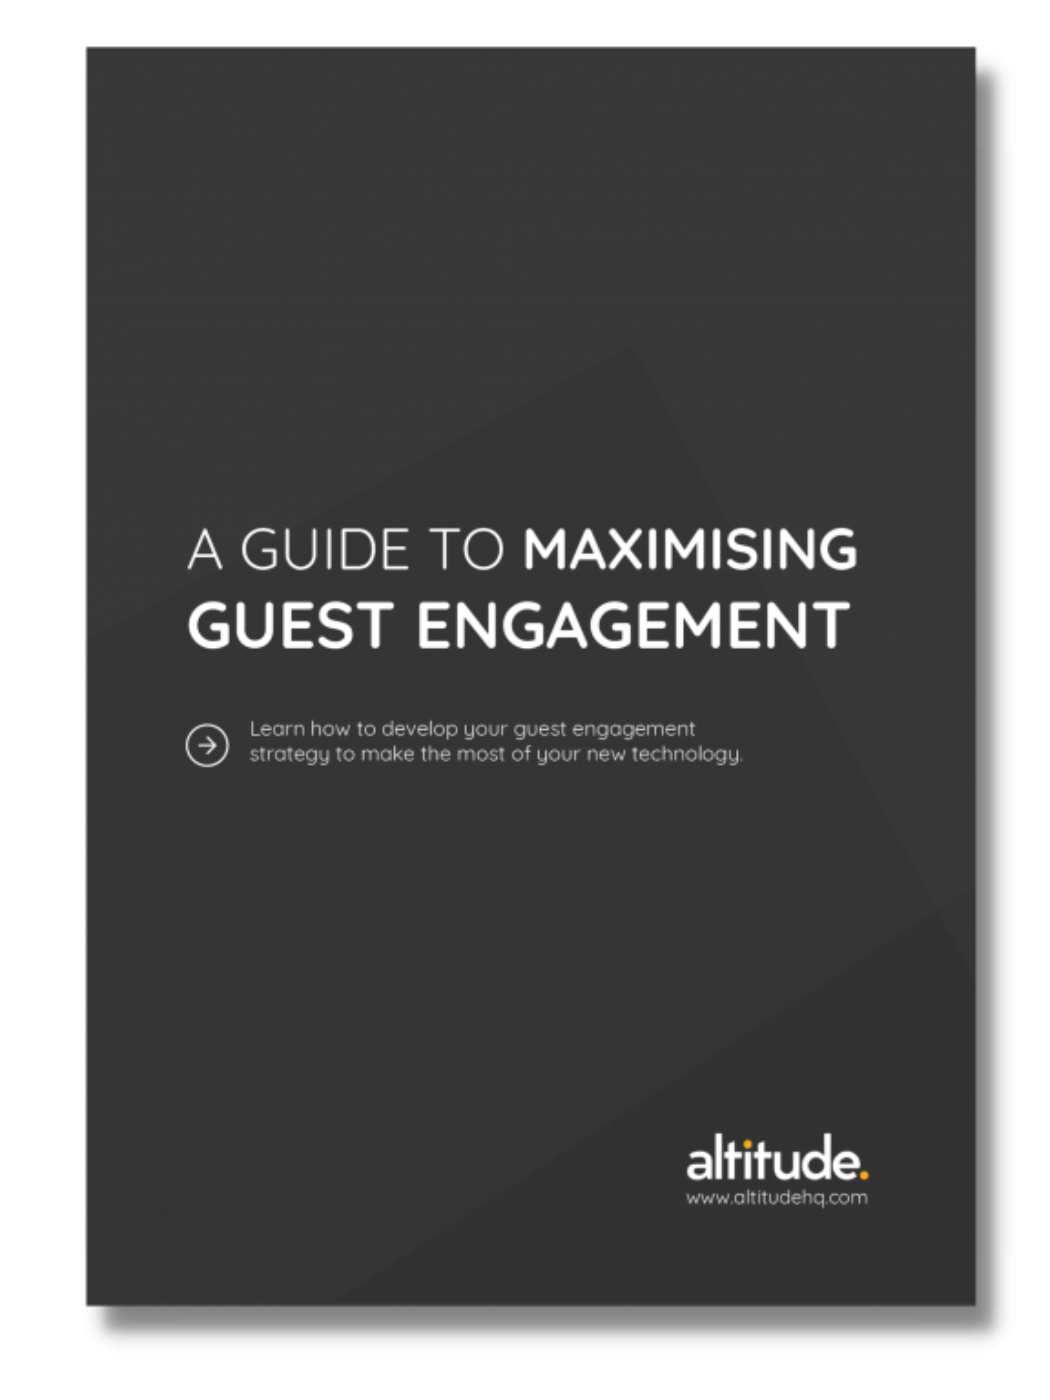 A Guide to Maximising Guest Engagement